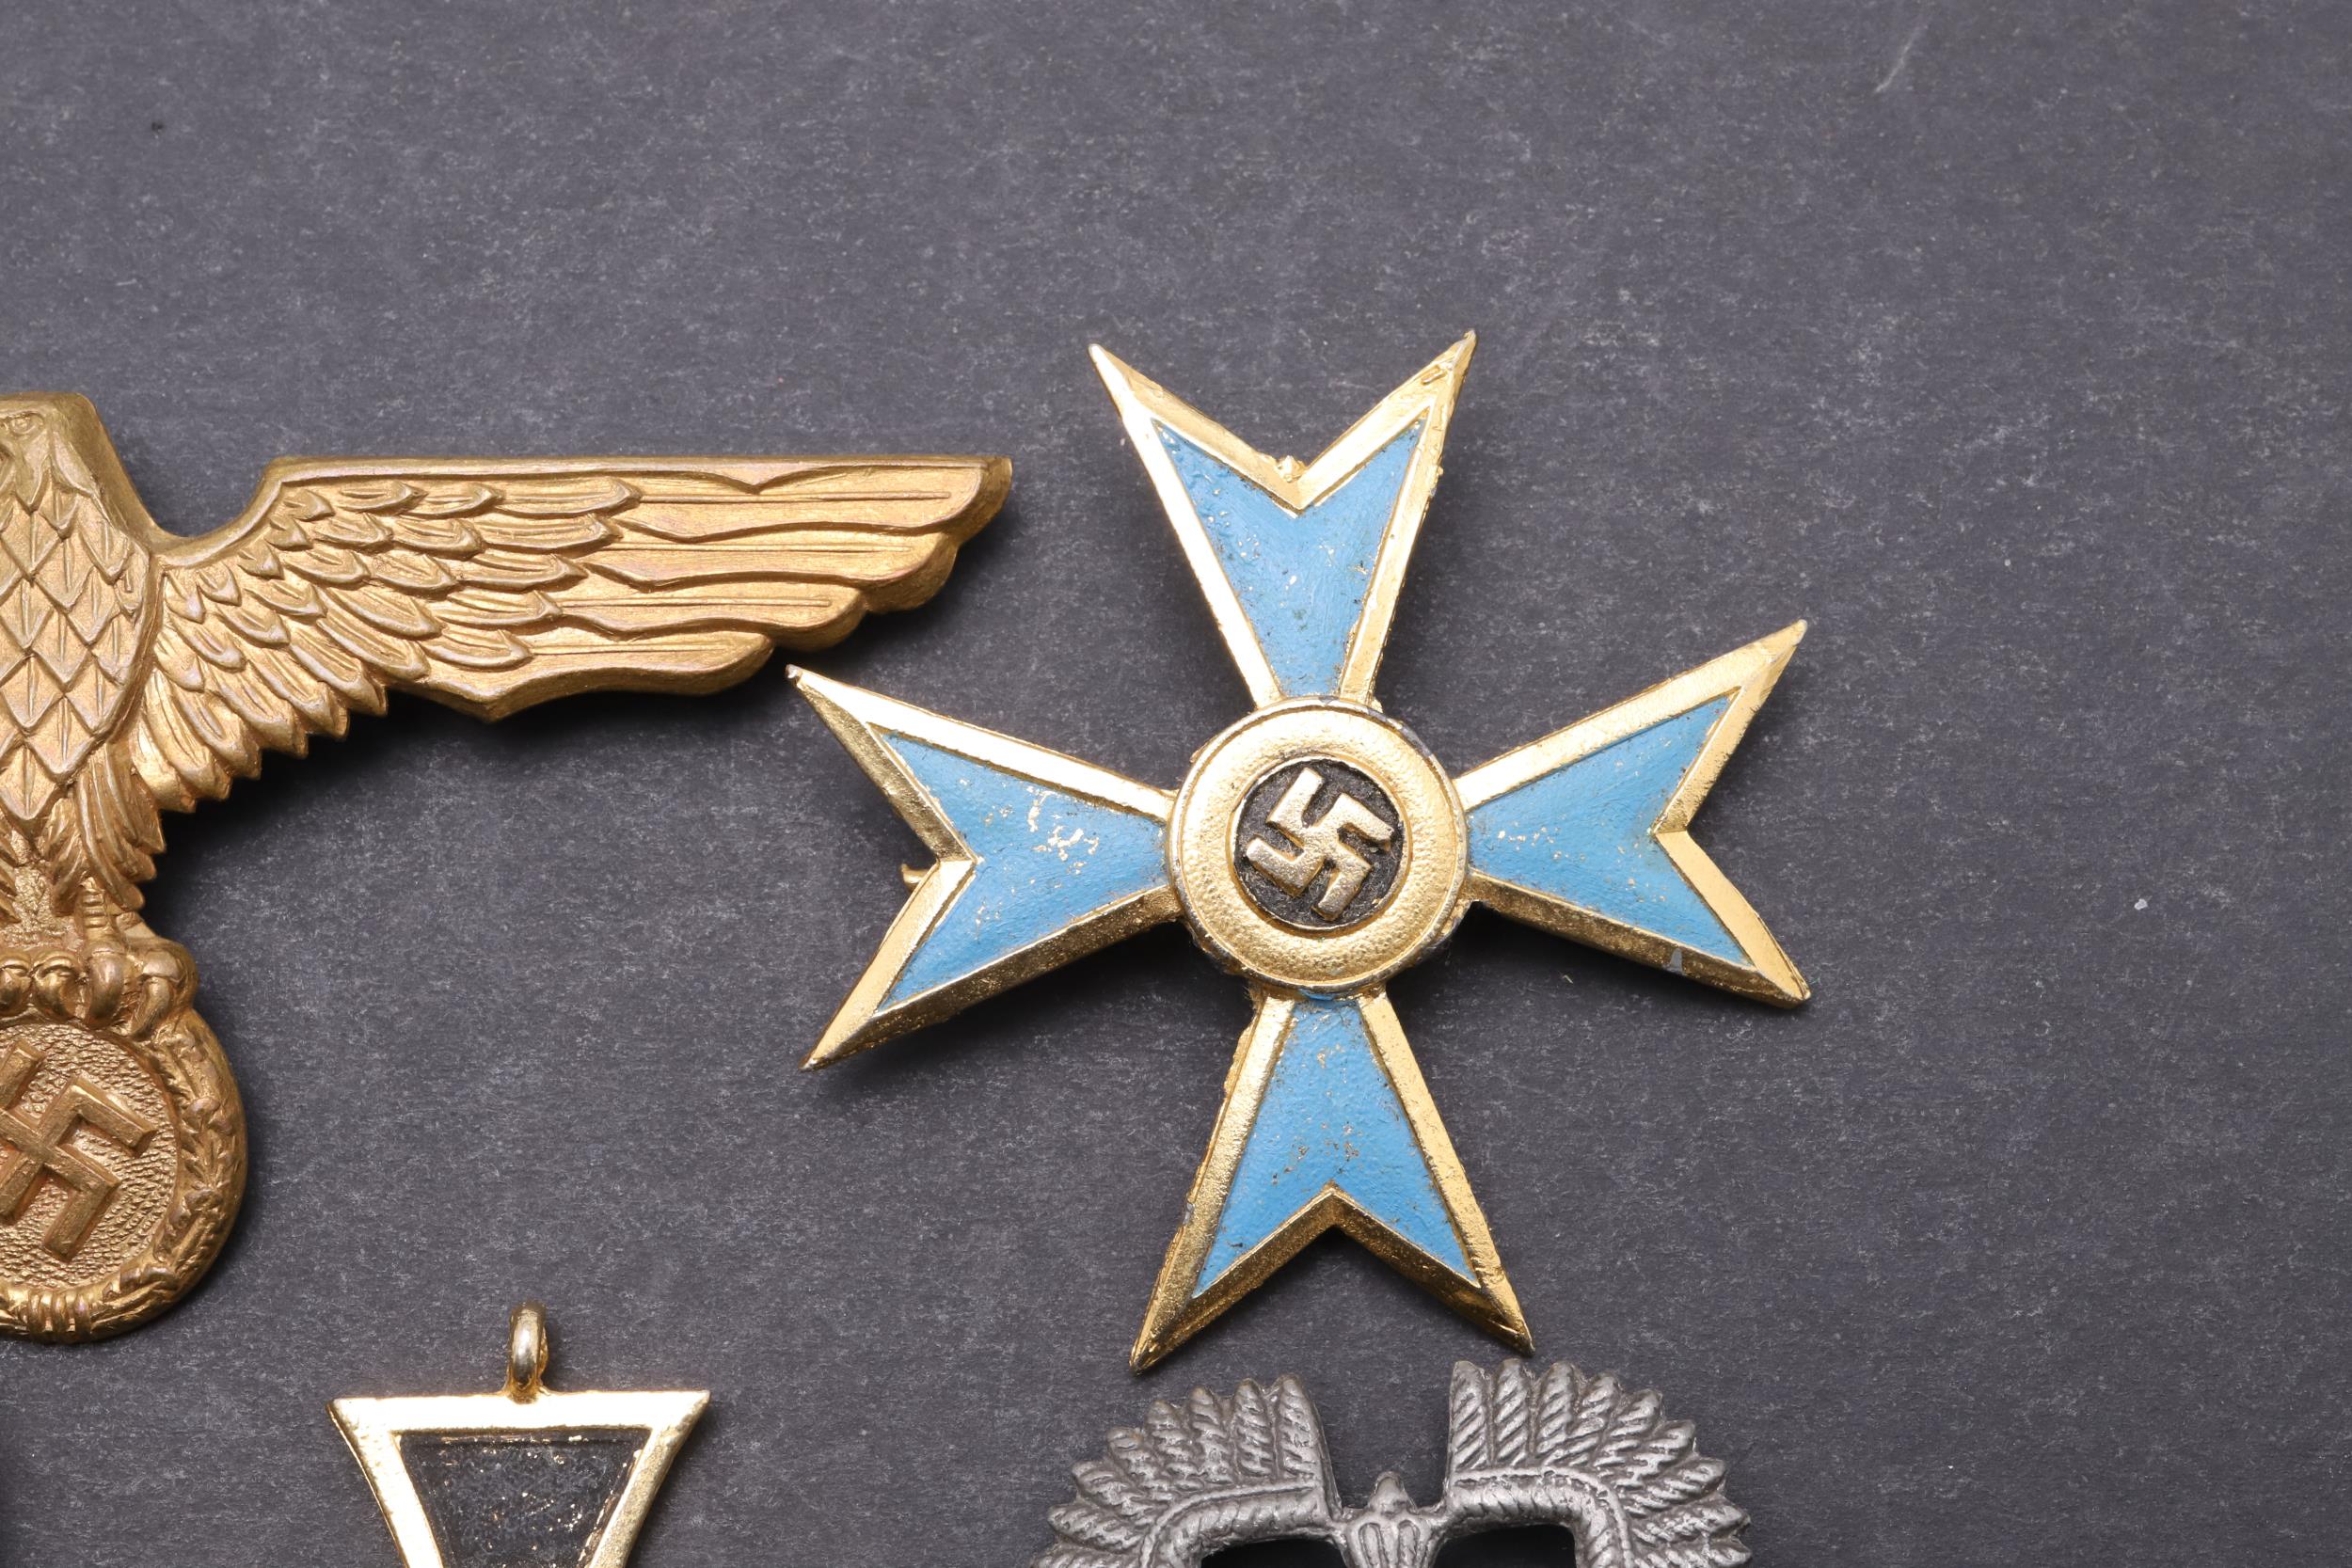 A SECOND WORLD WAR GERMAN MARKSMAN'S BADGE AND OTHERS SIMILAR. - Image 5 of 10